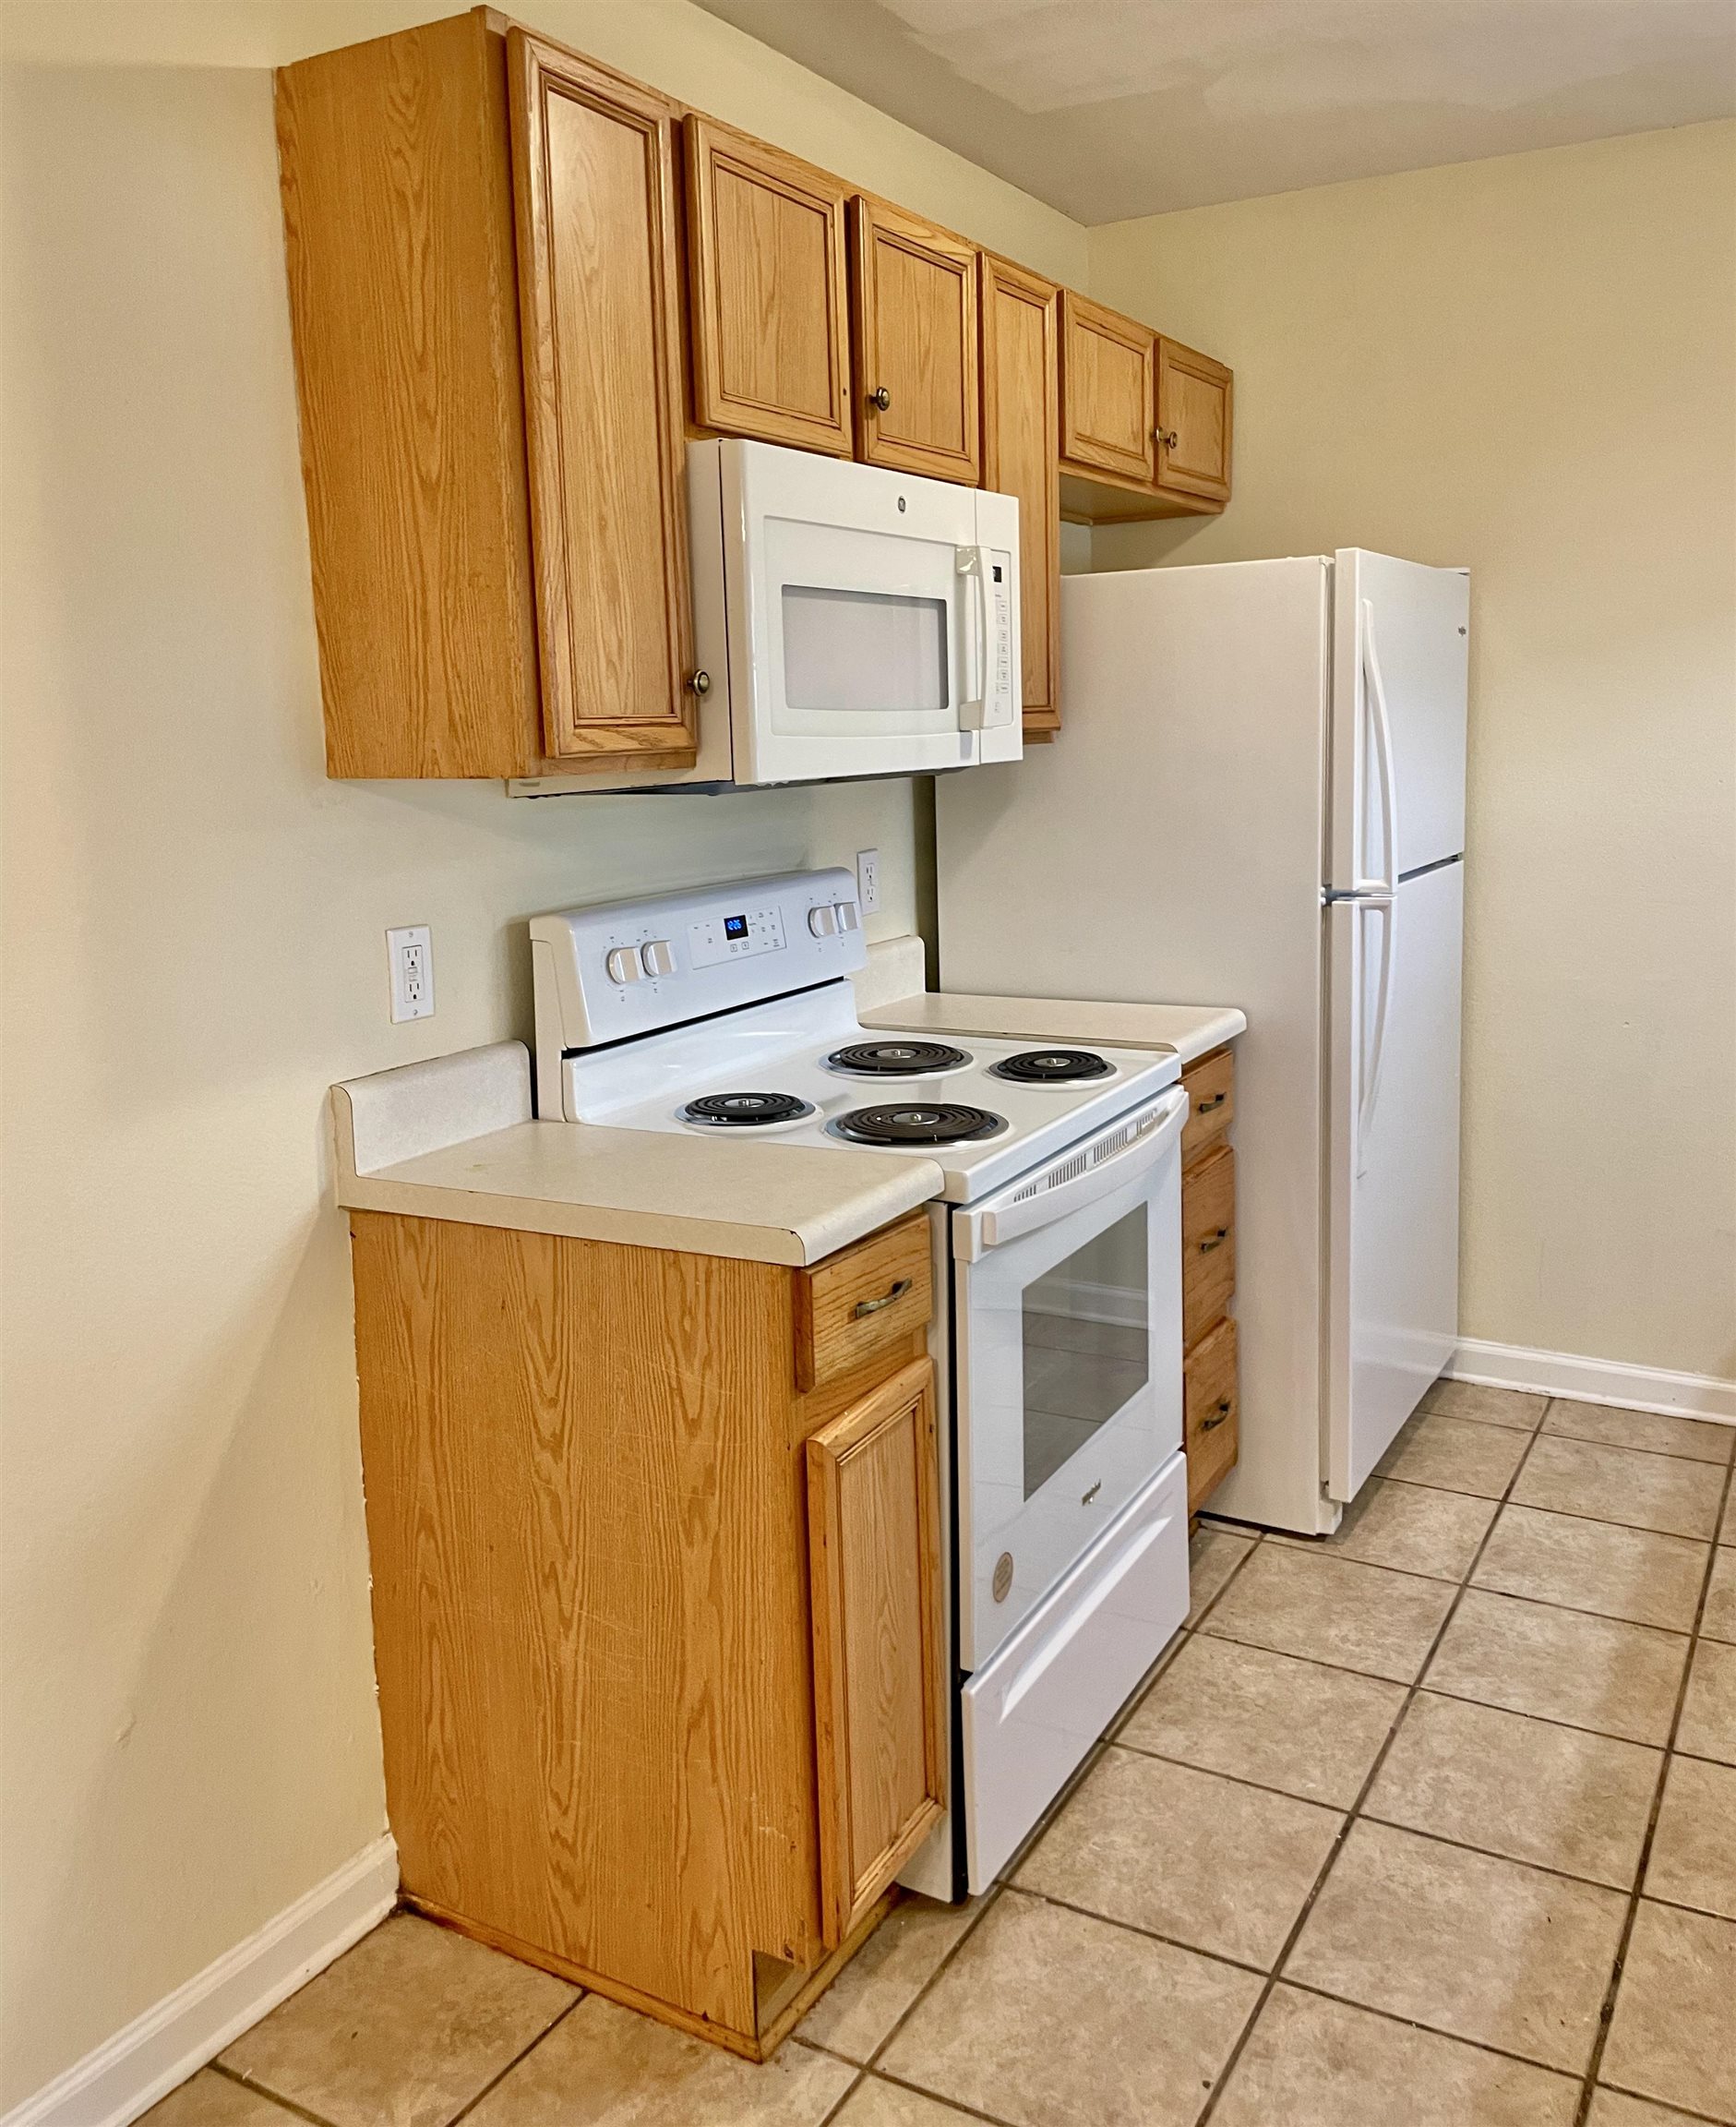 2738 W Tharpe Streets,TALLAHASSEE,Florida 32303,3 Bedrooms Bedrooms,3 BathroomsBathrooms,Condo,2738 W Tharpe Streets,369723